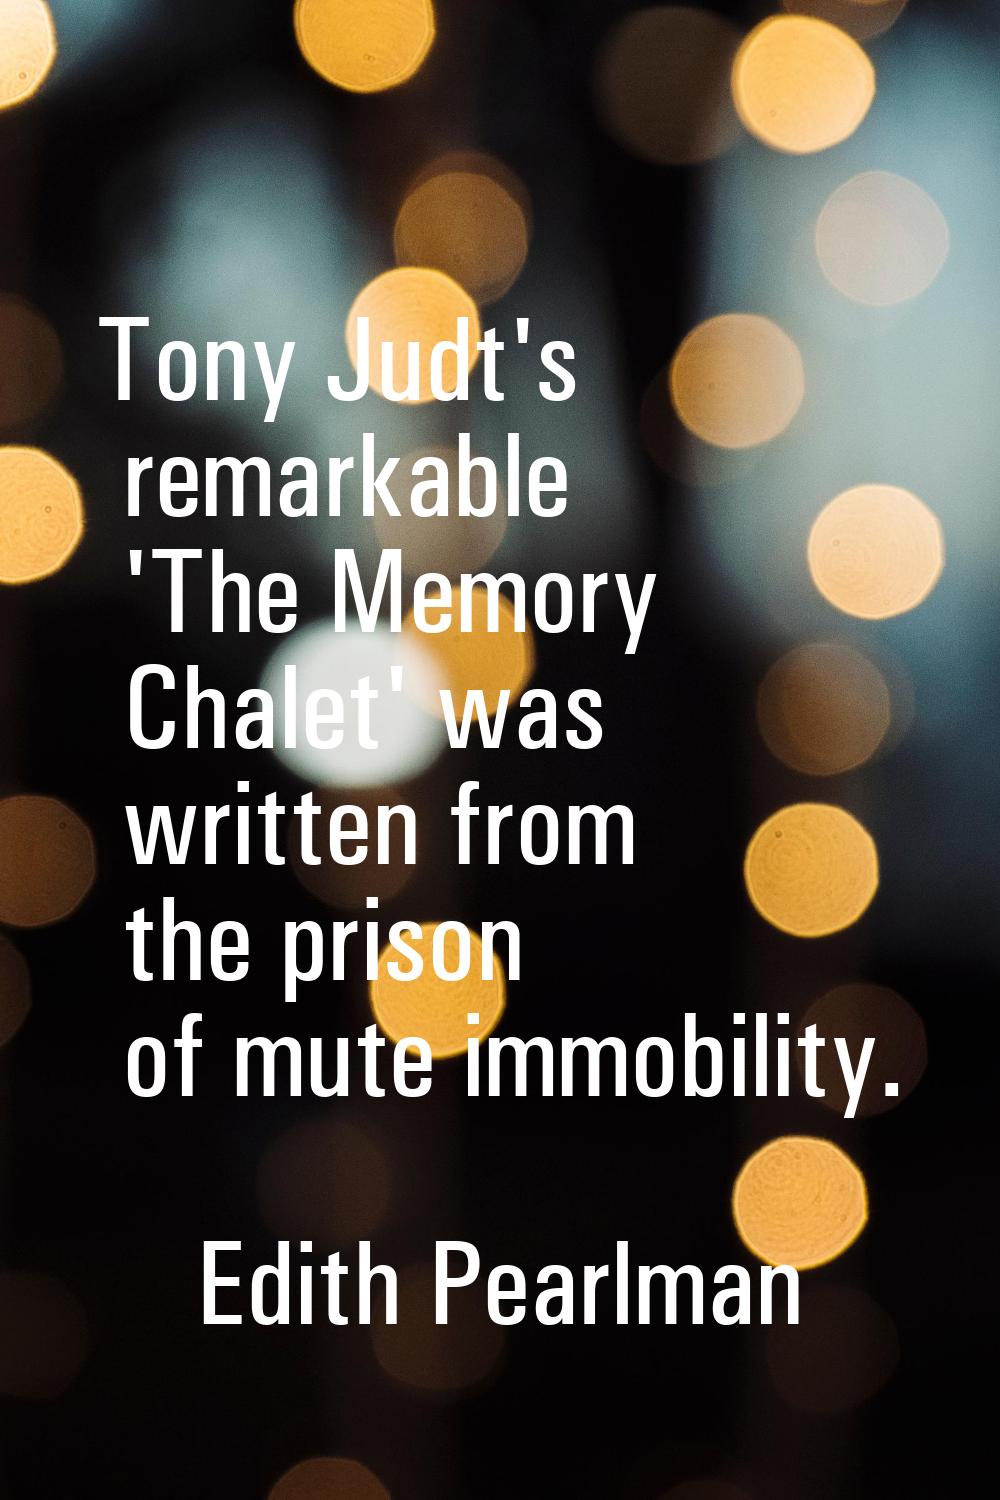 Tony Judt's remarkable 'The Memory Chalet' was written from the prison of mute immobility.